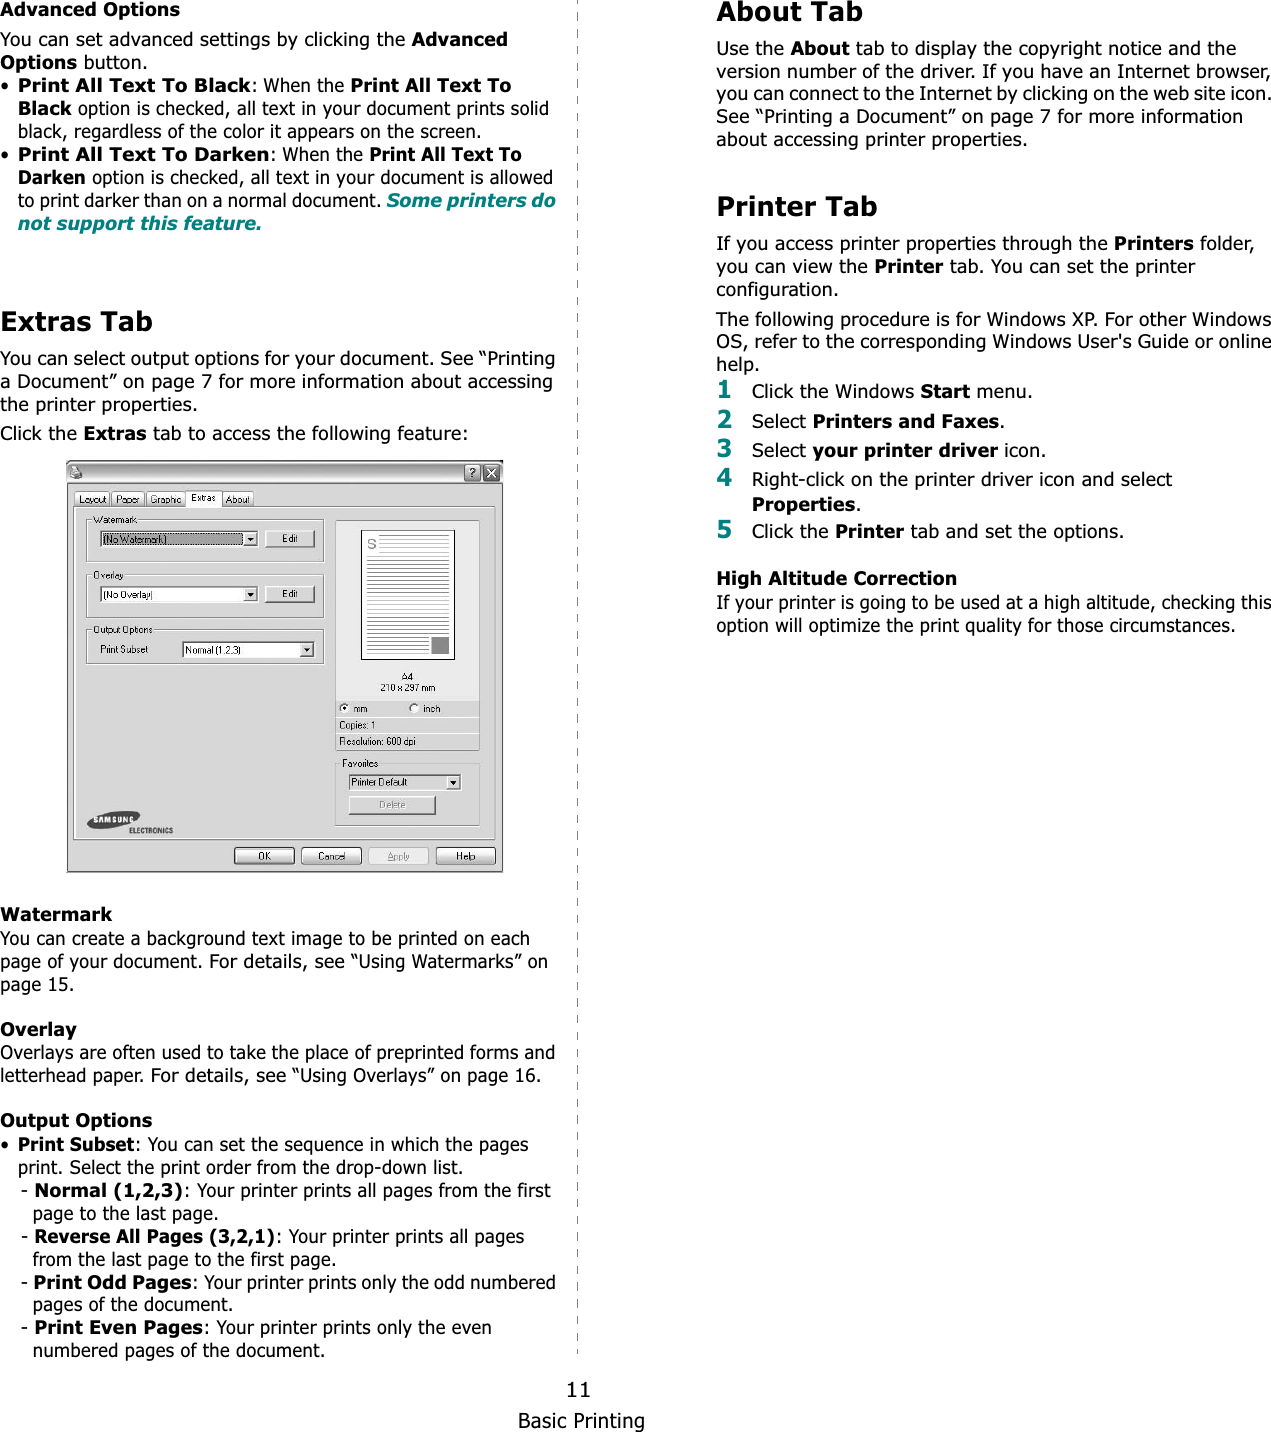 Basic Printing11Advanced OptionsYou can set advanced settings by clicking the Advanced Options button. •Print All Text To Black: When the Print All Text To Black option is checked, all text in your document prints solid black, regardless of the color it appears on the screen. •Print All Text To Darken: When the Print All Text To Darken option is checked, all text in your document is allowed to print darker than on a normal document. Some printers do not support this feature. Extras TabYou can select output options for your document. See “Printing a Document” on page 7 for more information about accessing the printer properties.Click the Extras tab to access the following feature:  WatermarkYou can create a background text image to be printed on each page of your document. For details, see “Using Watermarks” on page 15.OverlayOverlays are often used to take the place of preprinted forms and letterhead paper. For details, see “Using Overlays” on page 16.Output Options•Print Subset: You can set the sequence in which the pages print. Select the print order from the drop-down list.-Normal (1,2,3): Your printer prints all pages from the first page to the last page.-Reverse All Pages (3,2,1): Your printer prints all pages from the last page to the first page.-Print Odd Pages: Your printer prints only the odd numbered pages of the document.-Print Even Pages: Your printer prints only the even numbered pages of the document.About TabUse the About tab to display the copyright notice and the version number of the driver. If you have an Internet browser, you can connect to the Internet by clicking on the web site icon. See “Printing a Document” on page 7 for more information about accessing printer properties.Printer TabIf you access printer properties through the Printers folder, you can view the Printer tab. You can set the printer configuration.The following procedure is for Windows XP. For other Windows OS, refer to the corresponding Windows User&apos;s Guide or online help.1Click the Windows Start menu. 2Select Printers and Faxes.3Select your printer driver icon. 4Right-click on the printer driver icon and select Properties.5Click the Printer tab and set the options.  High Altitude CorrectionIf your printer is going to be used at a high altitude, checking this option will optimize the print quality for those circumstances. 